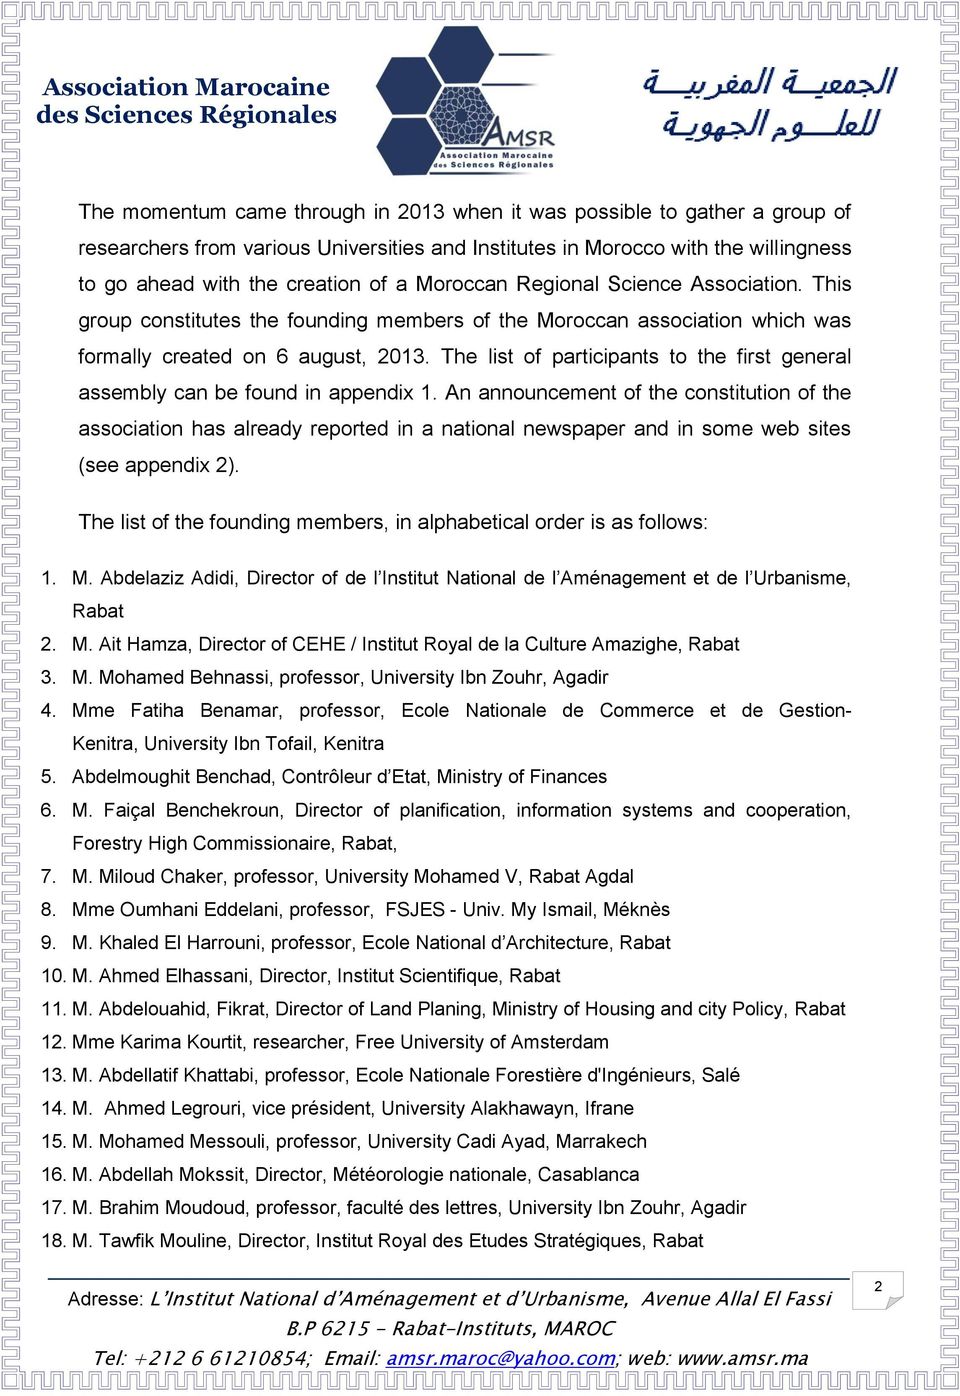 The list of participants to the first general assembly can be found in appendix 1.